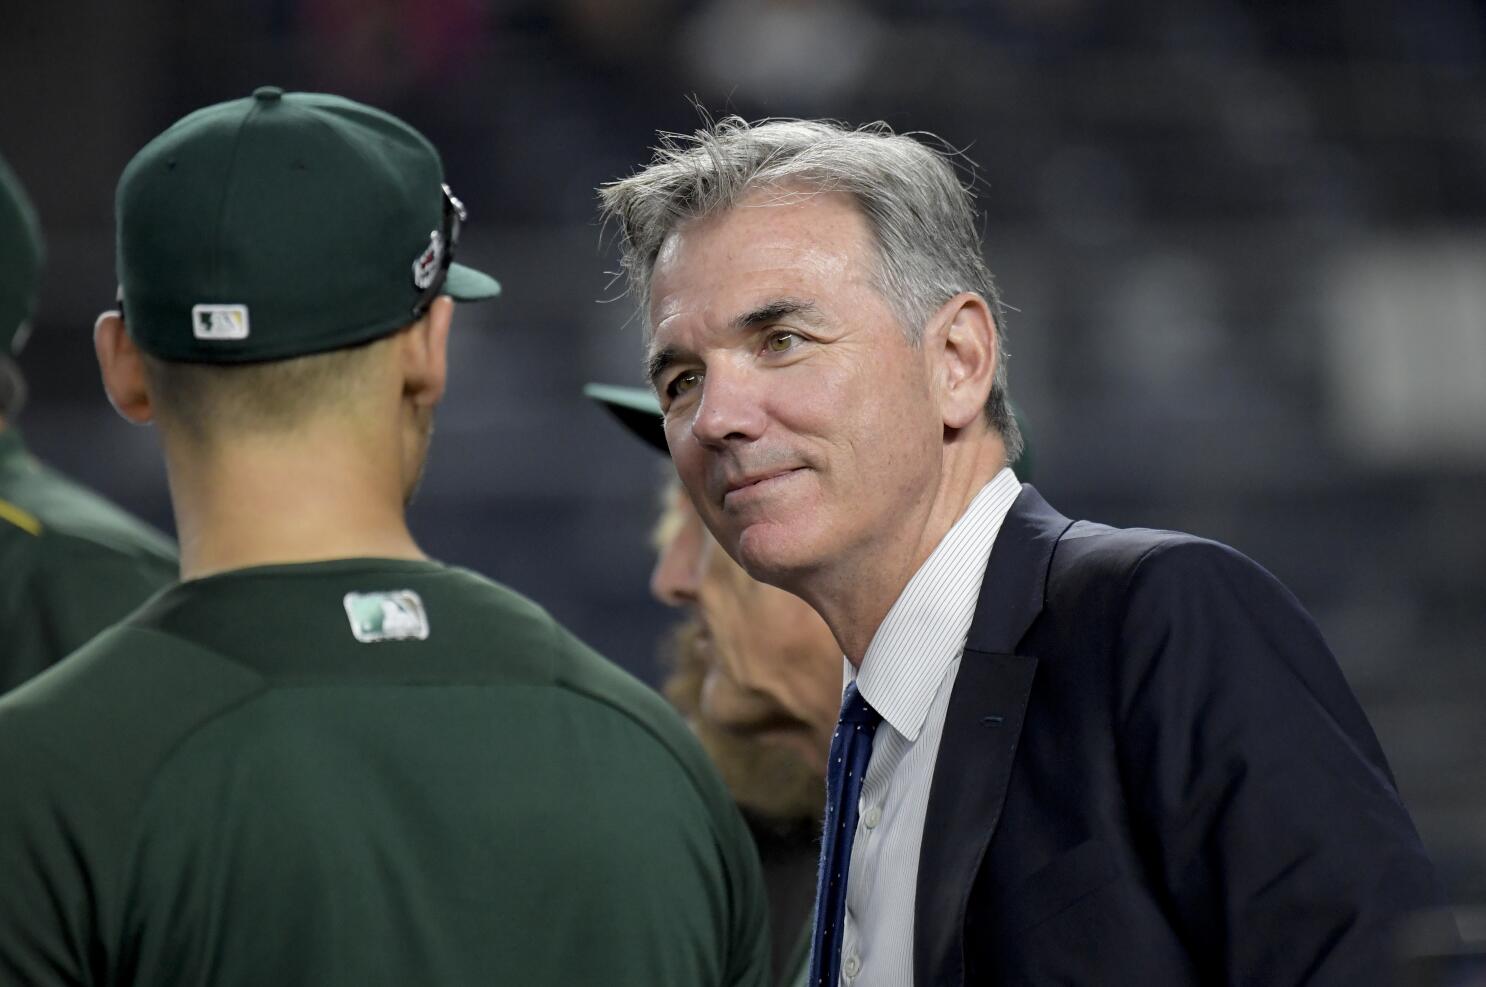 Angels sale: Billy Beane, Theo Epstein could join ownership group